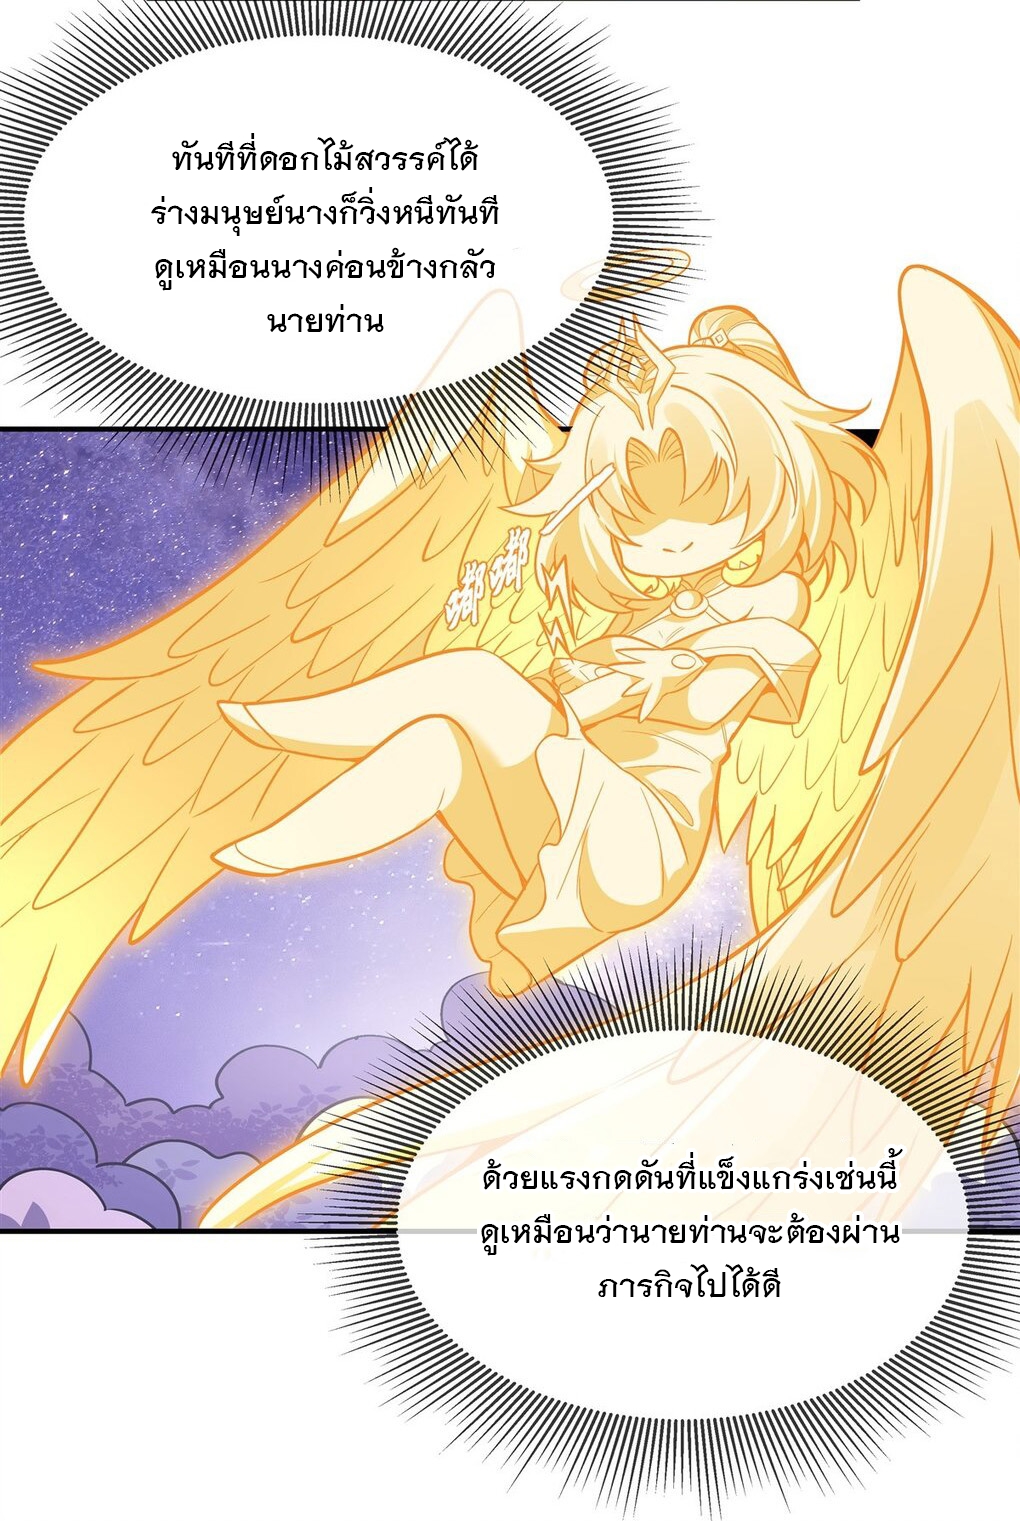 My Female Apprentices Are All Big Shots From the Future Ã Â¸â€¢Ã Â¸Â­Ã Â¸â„¢Ã Â¸â€”Ã Â¸ÂµÃ Â¹Ë† 93 (9)